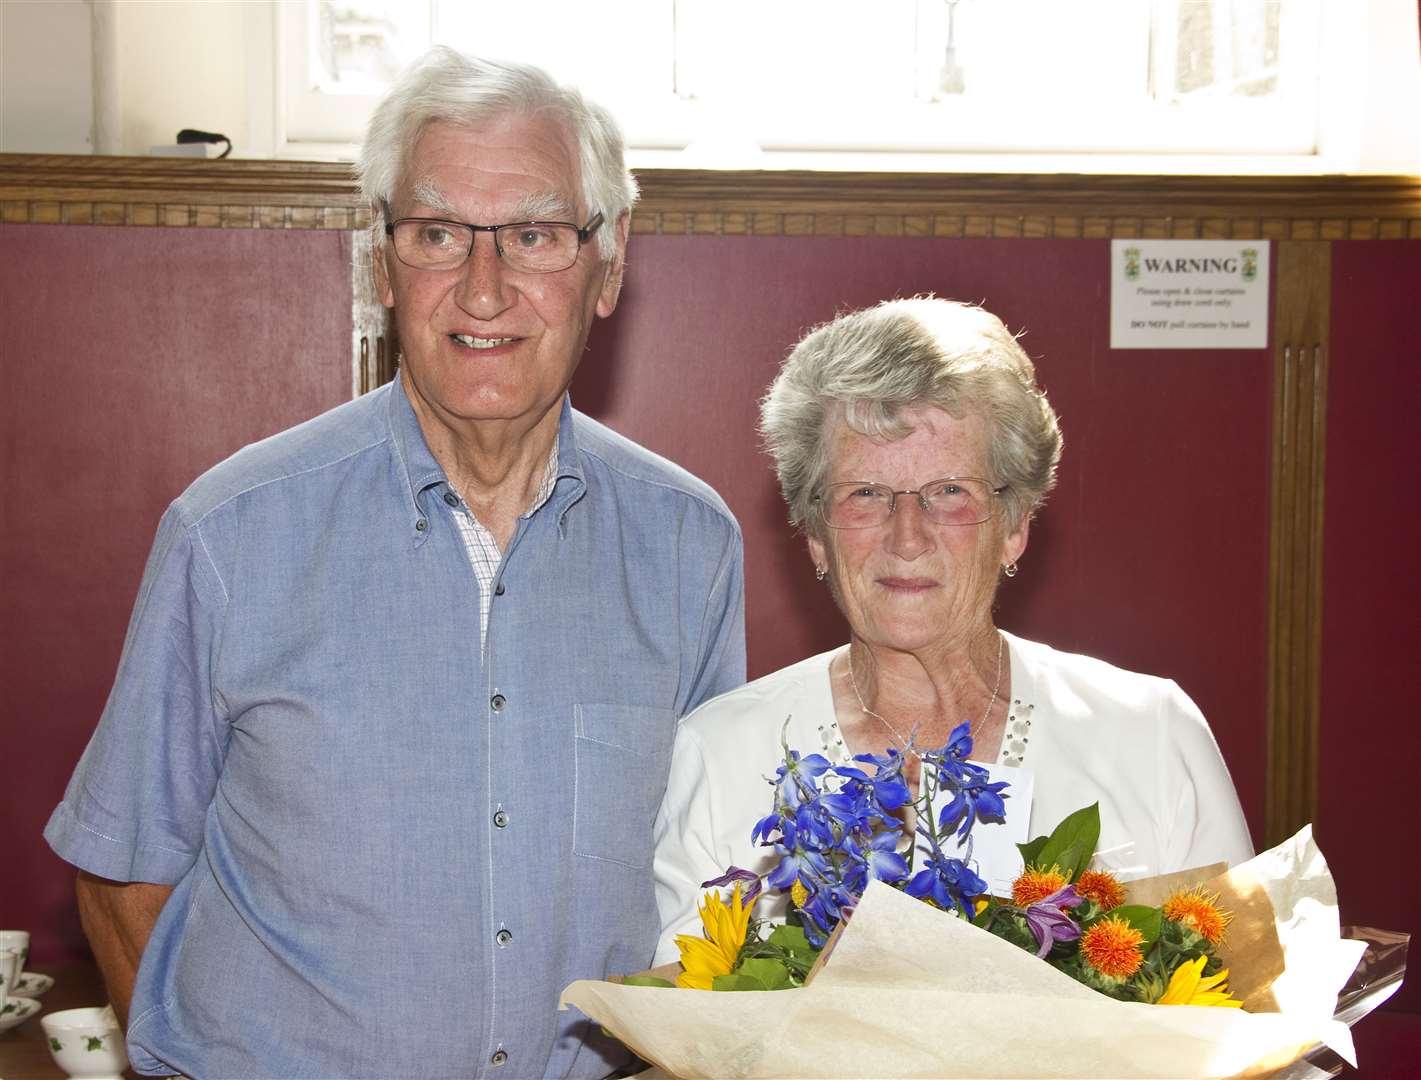 Tom and Iris Logie were presented with flowers for their expertise.